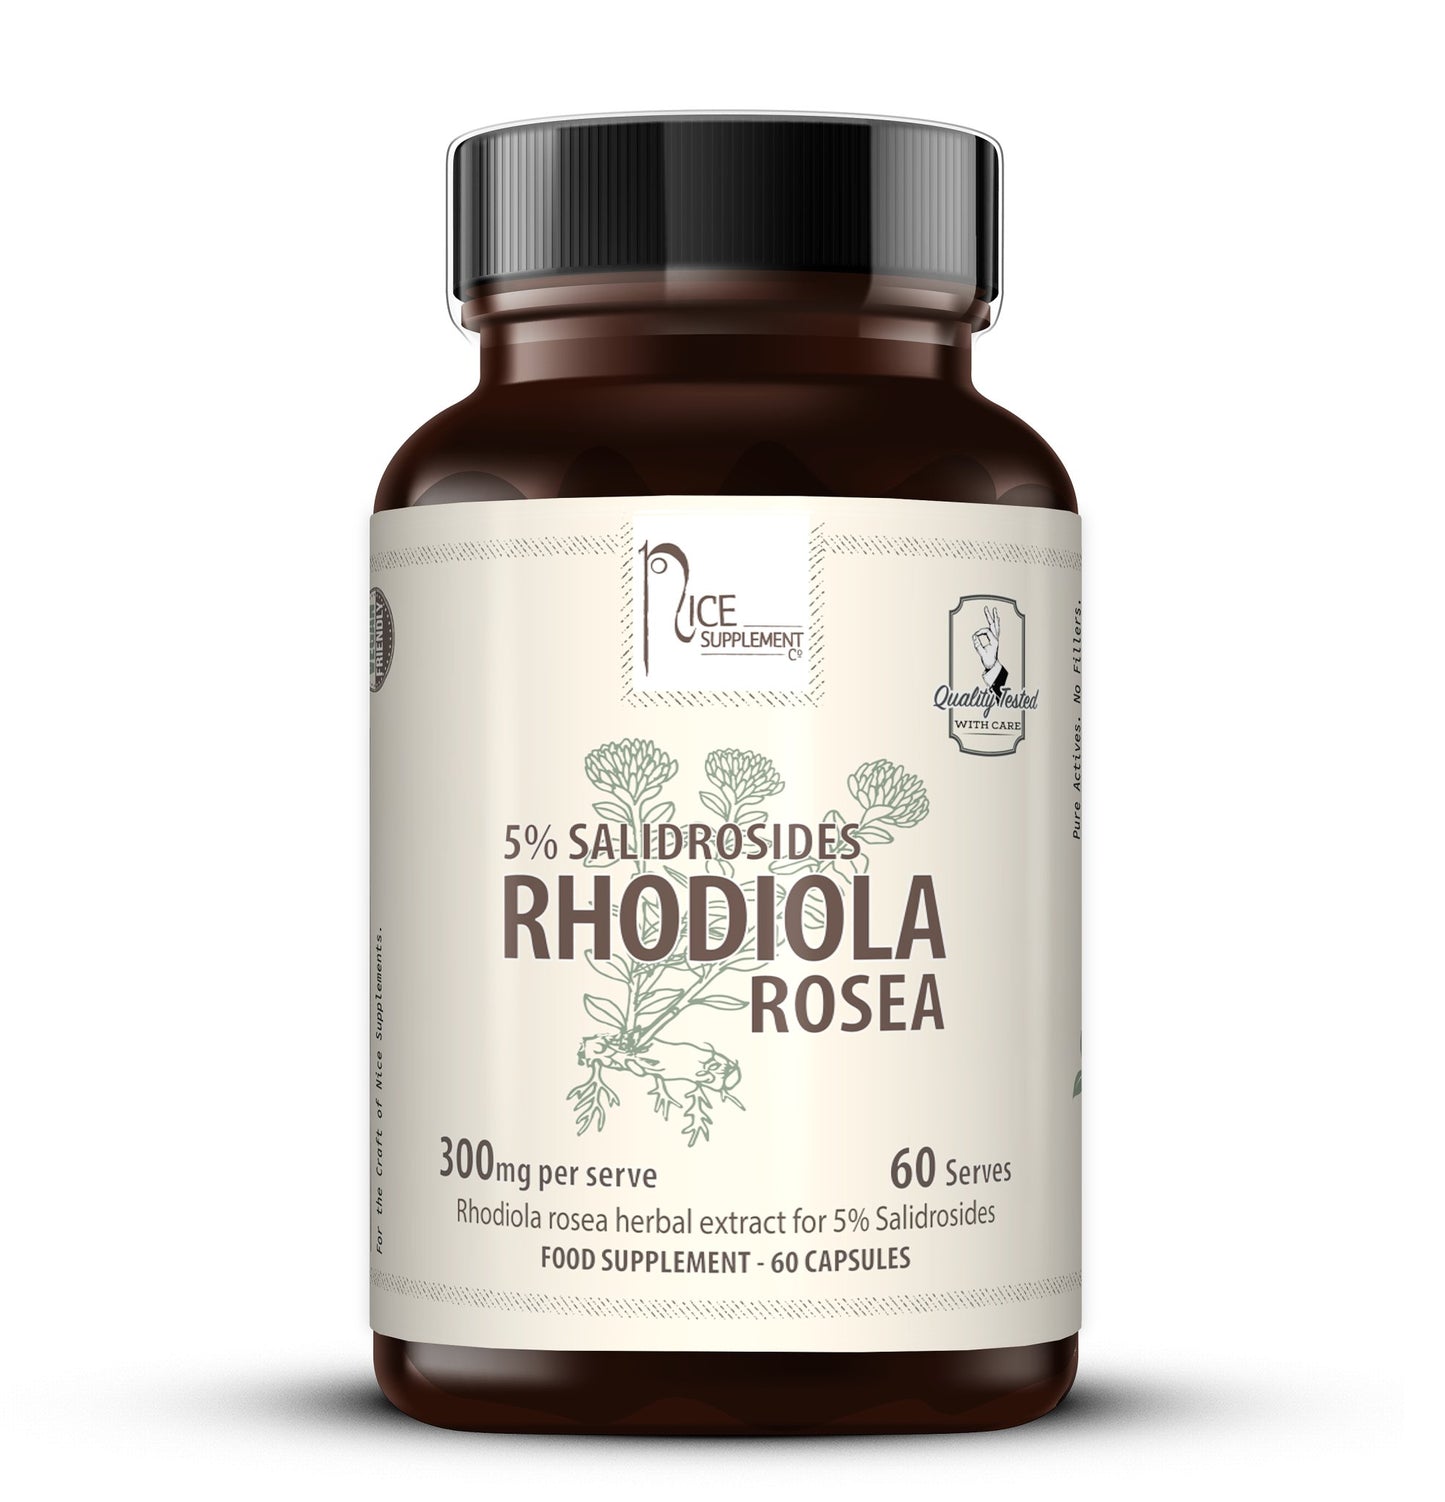 Rhodiola Rosea High Potency 5% Salidrosides for Mood and Adaptogen Stress  -  Product Render  - Nice Supplement Co.